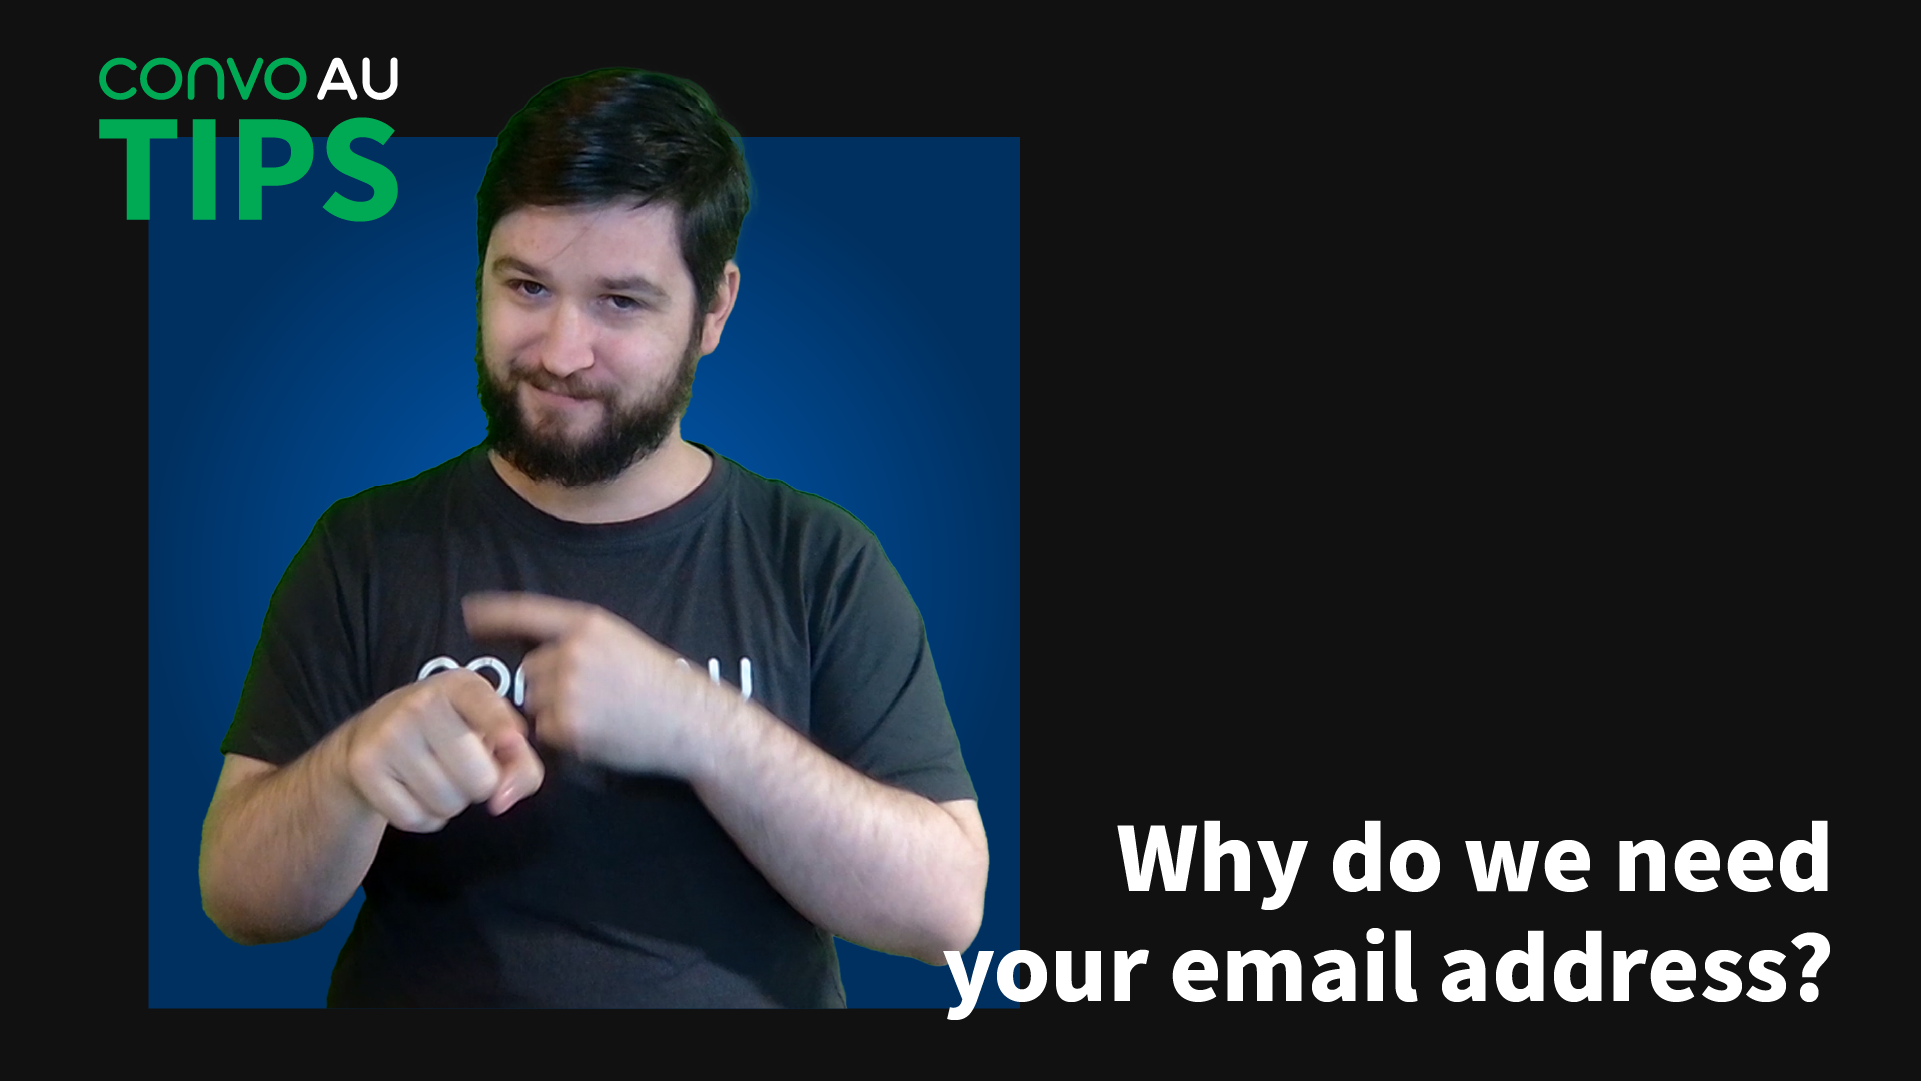 Tips: why do we need your email address?